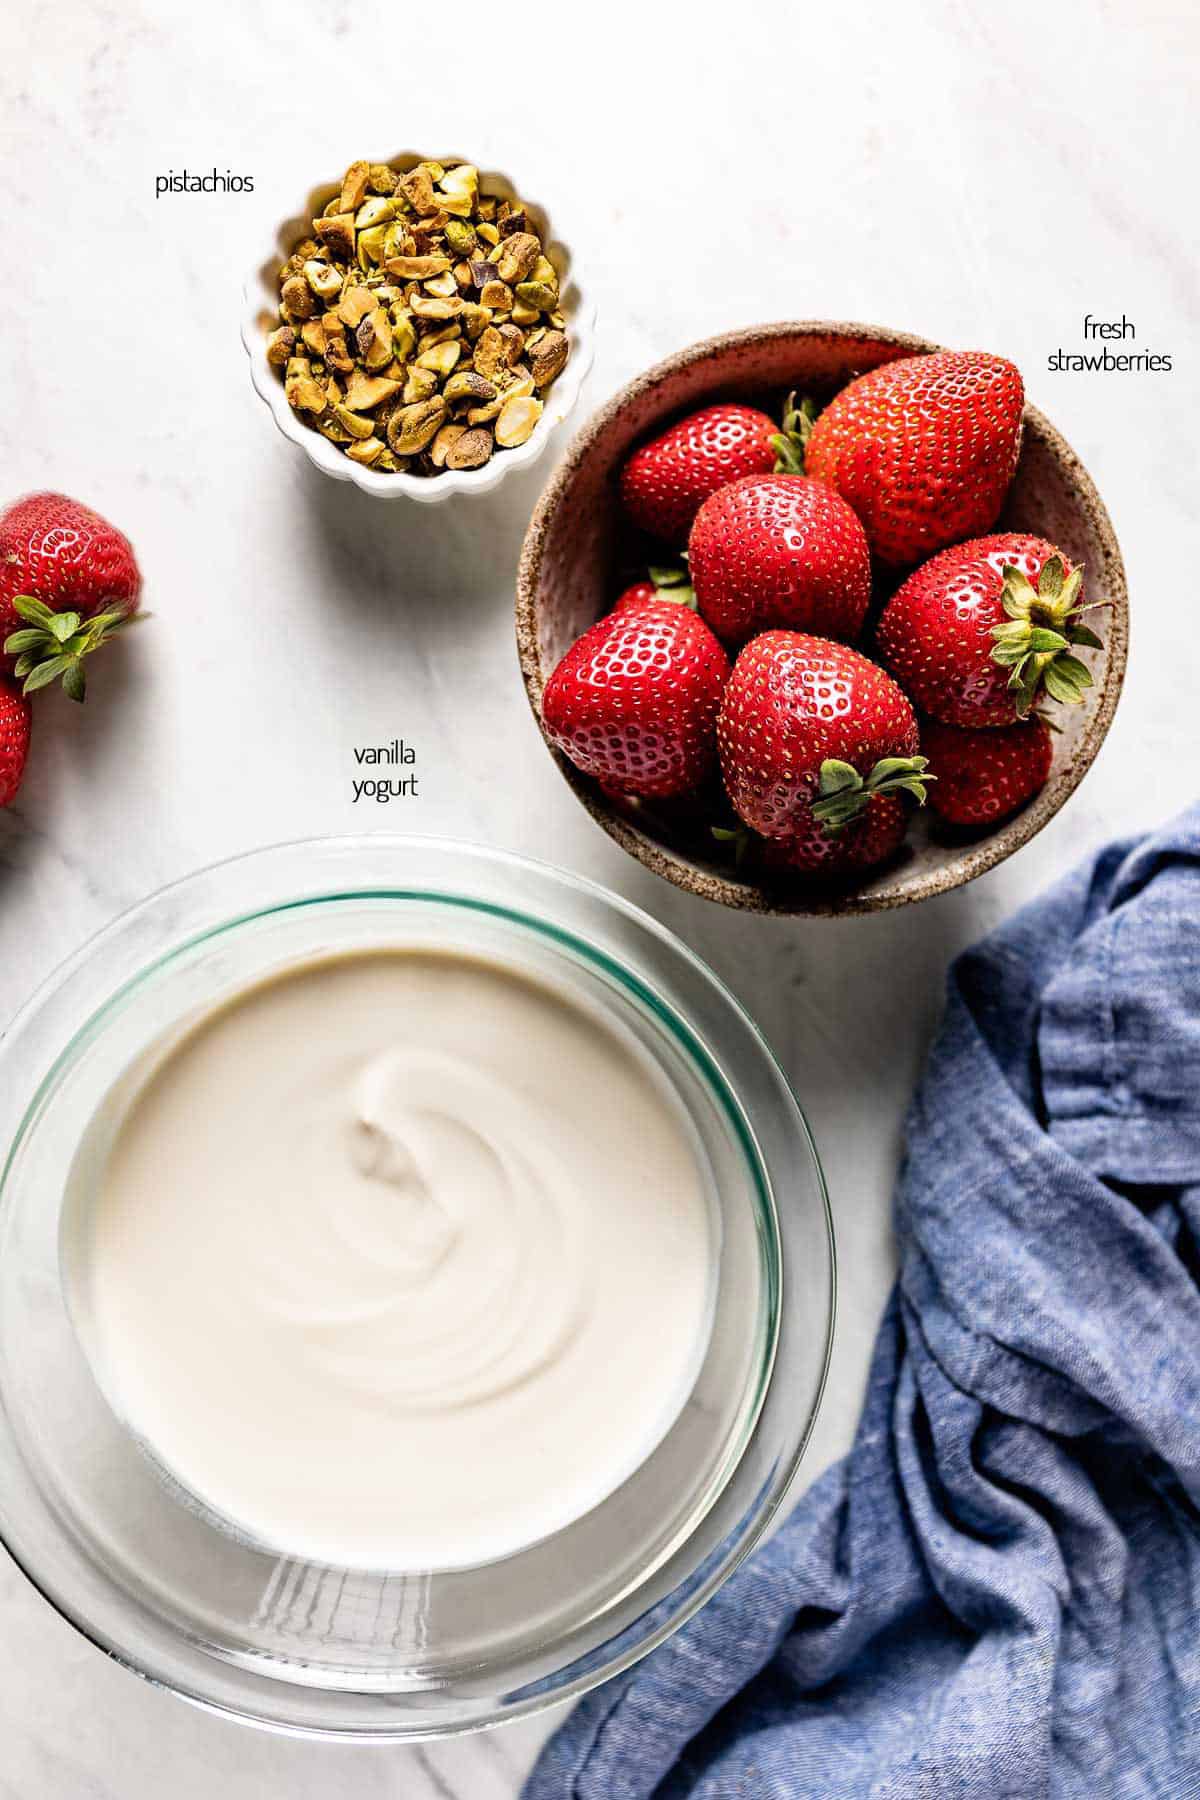 yogurt, strawberries, and pistachios in bowls as ingredients for fro yo bark